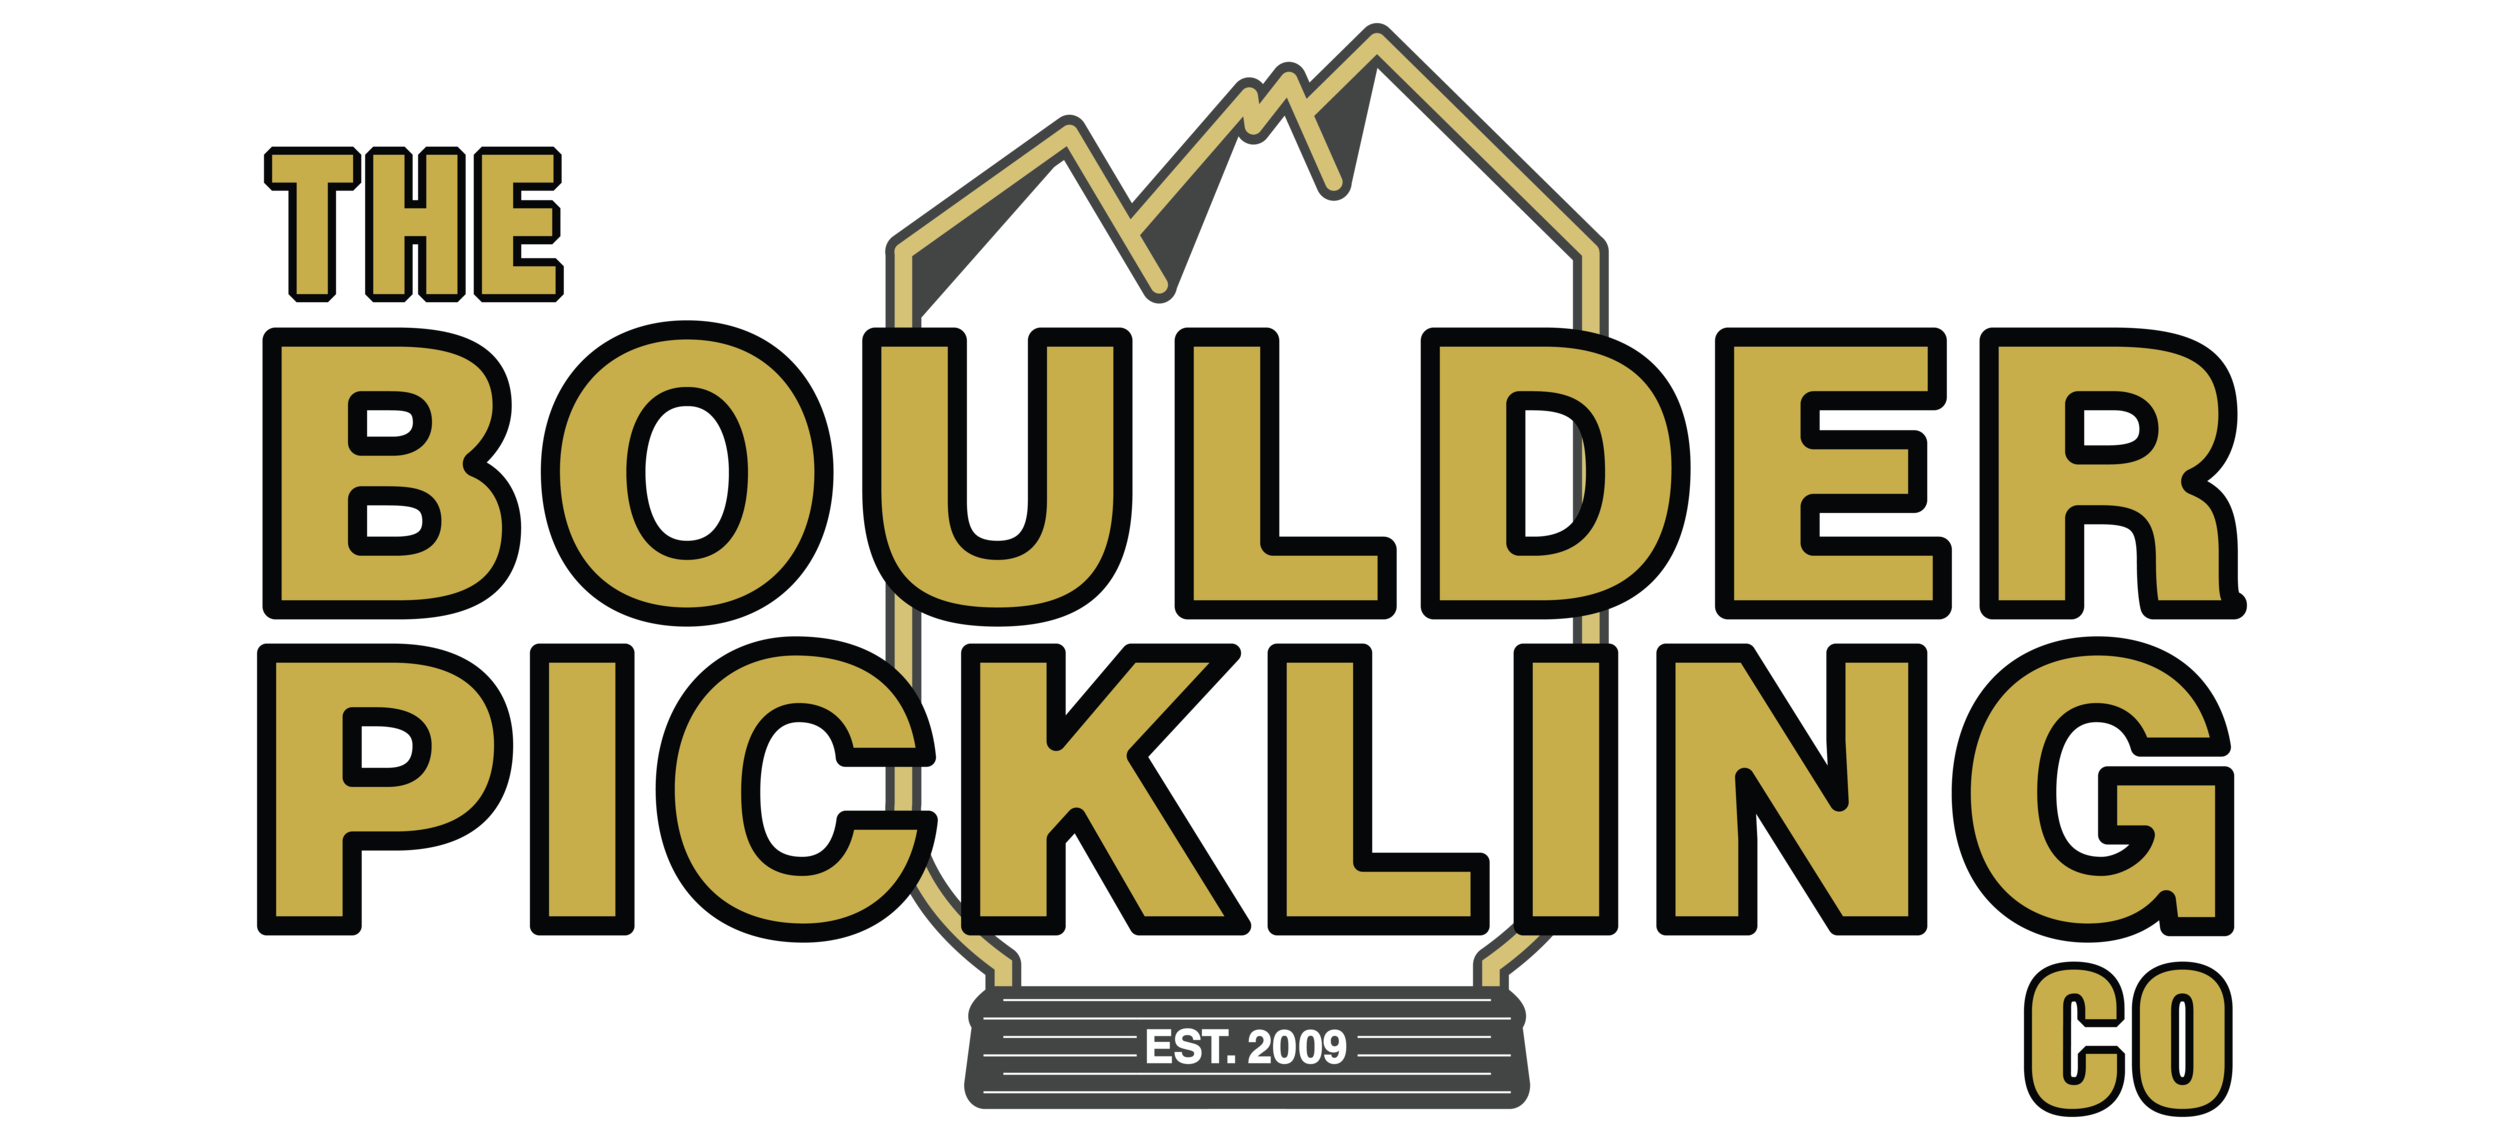 The Boulder Pickling Company